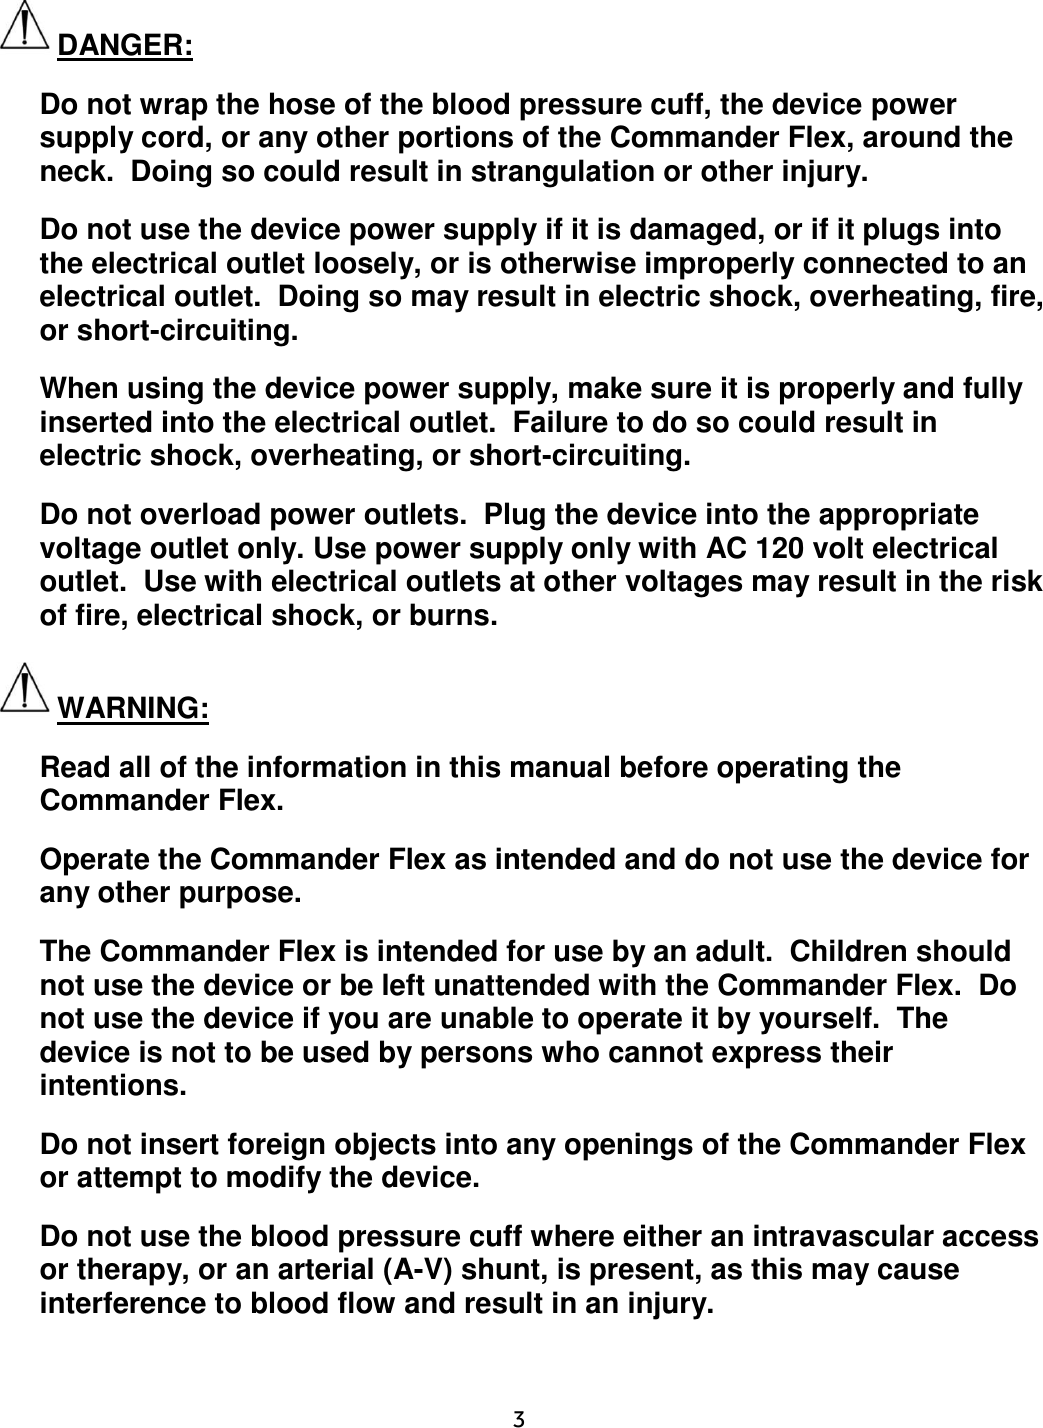     3  DANGER: Do not wrap the hose of the blood pressure cuff, the device power supply cord, or any other portions of the Commander Flex, around the neck.  Doing so could result in strangulation or other injury. Do not use the device power supply if it is damaged, or if it plugs into the electrical outlet loosely, or is otherwise improperly connected to an electrical outlet.  Doing so may result in electric shock, overheating, fire, or short-circuiting. When using the device power supply, make sure it is properly and fully inserted into the electrical outlet.  Failure to do so could result in electric shock, overheating, or short-circuiting. Do not overload power outlets.  Plug the device into the appropriate voltage outlet only. Use power supply only with AC 120 volt electrical outlet.  Use with electrical outlets at other voltages may result in the risk of fire, electrical shock, or burns. WARNING: Read all of the information in this manual before operating the Commander Flex. Operate the Commander Flex as intended and do not use the device for any other purpose. The Commander Flex is intended for use by an adult.  Children should not use the device or be left unattended with the Commander Flex.  Do not use the device if you are unable to operate it by yourself.  The device is not to be used by persons who cannot express their intentions. Do not insert foreign objects into any openings of the Commander Flex or attempt to modify the device. Do not use the blood pressure cuff where either an intravascular access or therapy, or an arterial (A-V) shunt, is present, as this may cause interference to blood flow and result in an injury. 